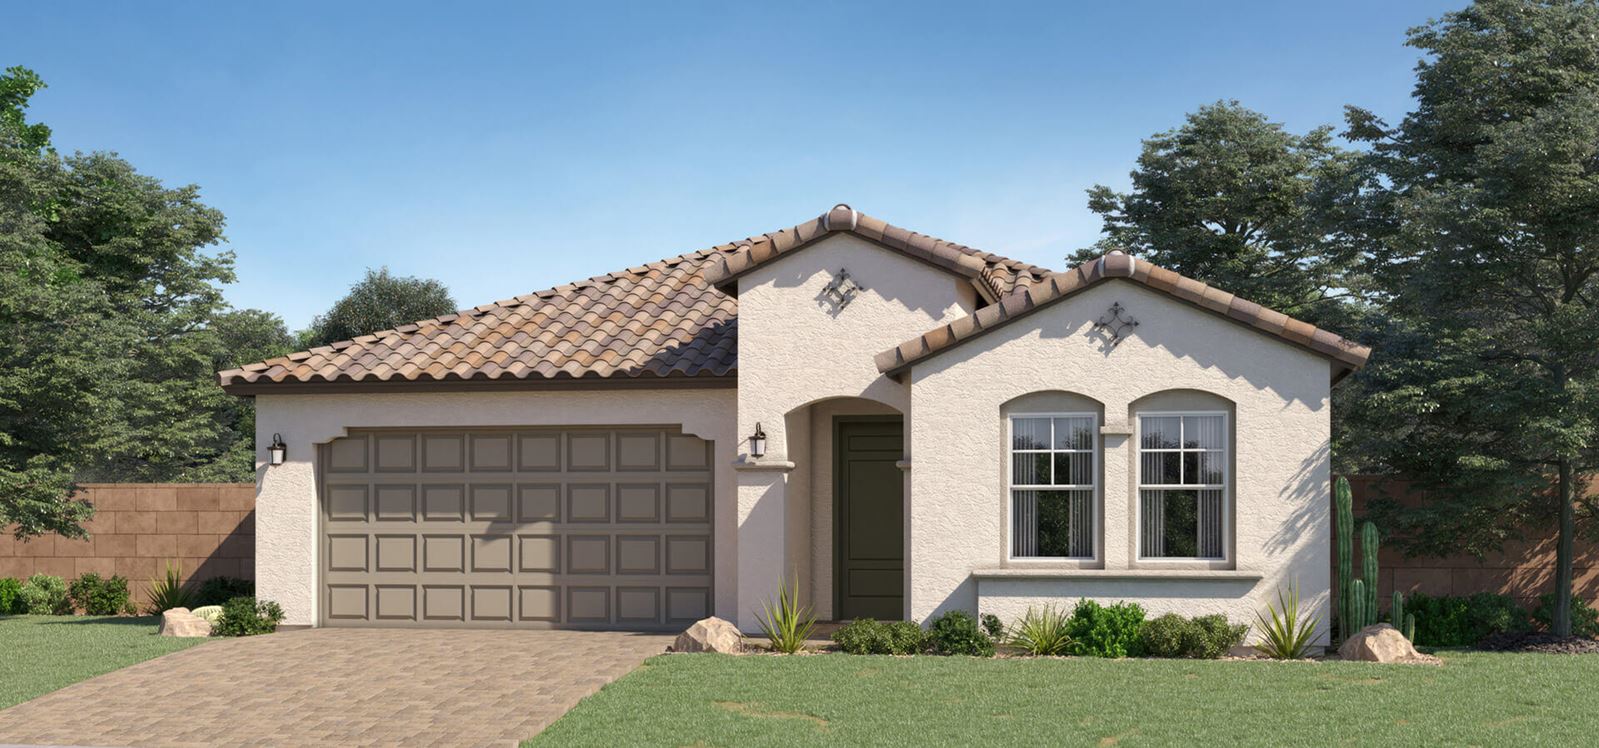 Rendering of a new model home in Blossom Rock community Apache Junction AZ